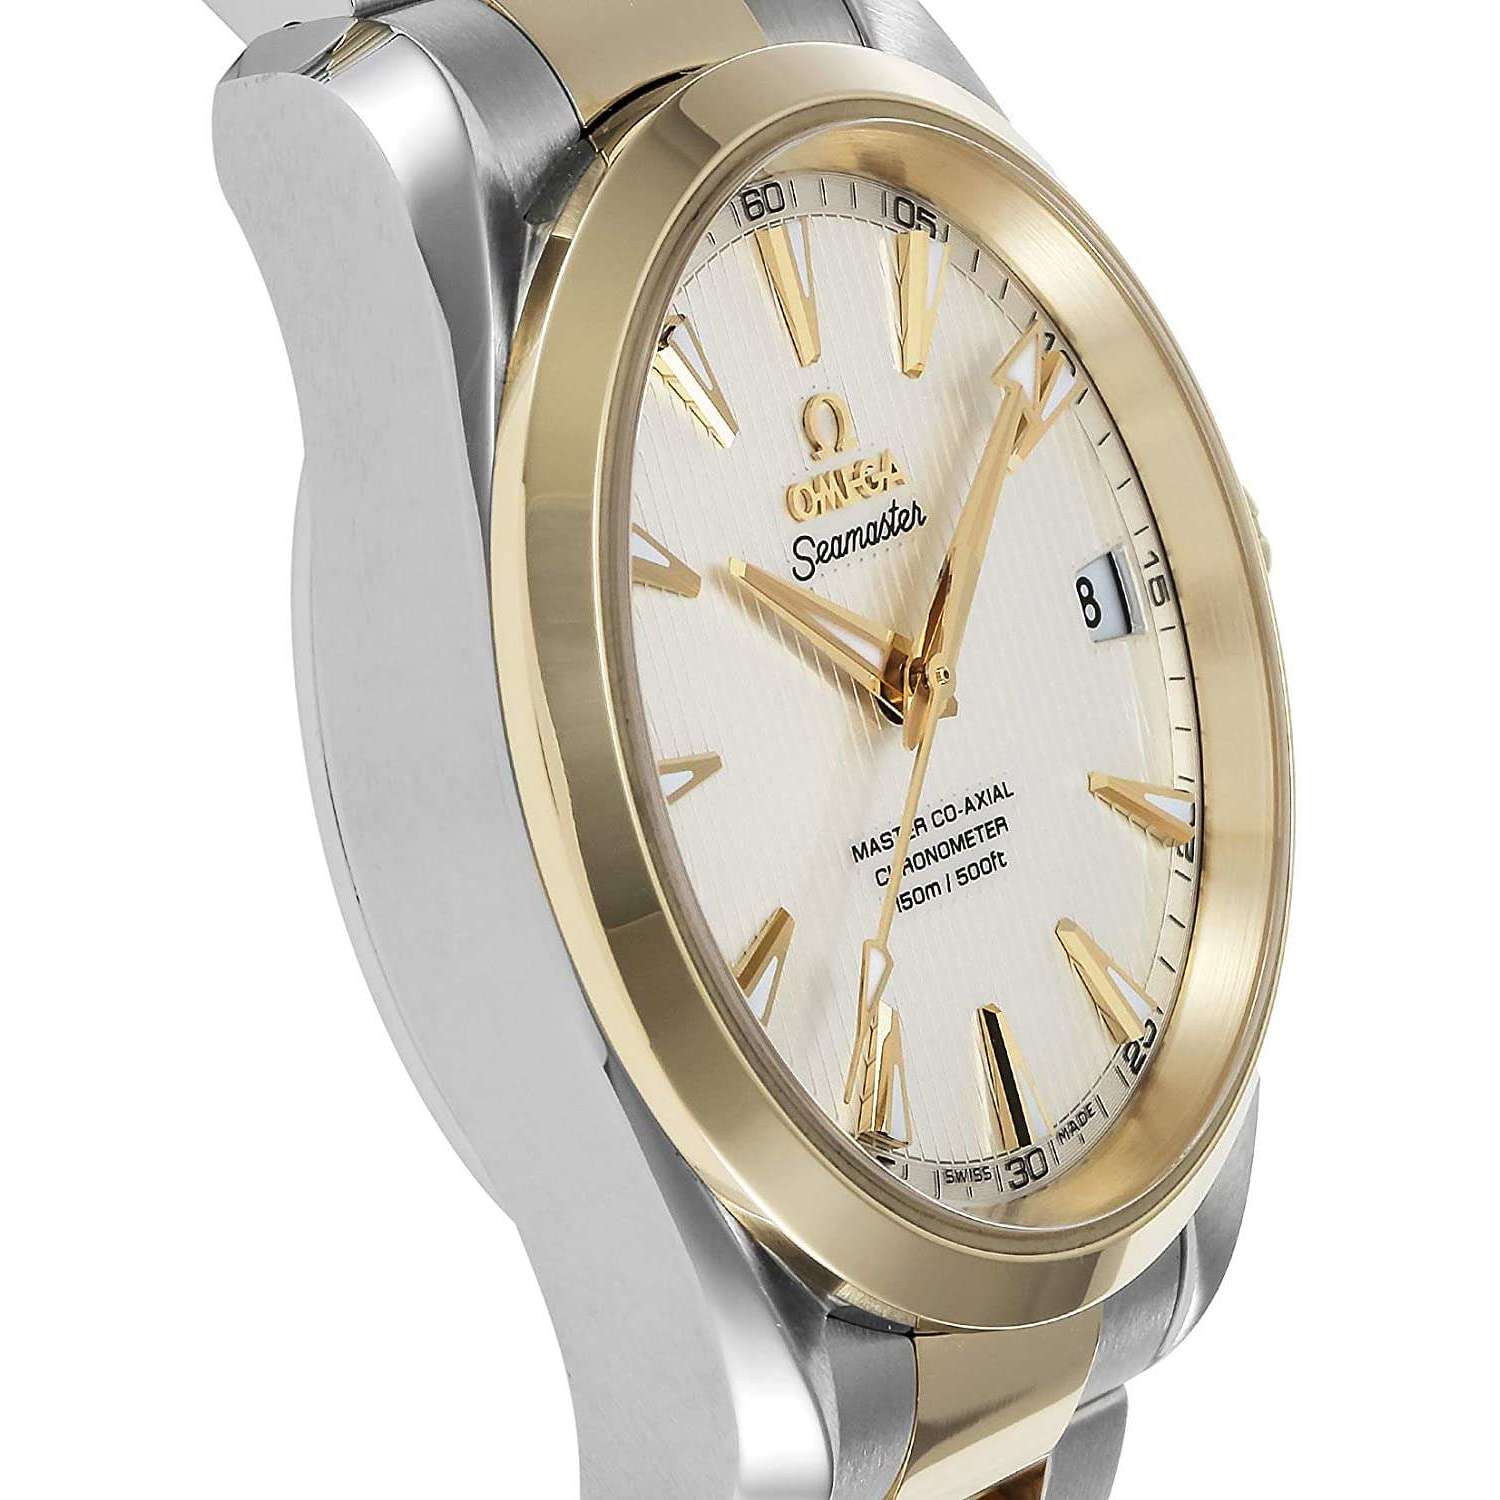 ROOK JAPAN:OMEGA SEAMASTER MASTER CO-AXIAL CHRONOMETER 38.5 MM MEN WATCH 231.20.39.21.02.002,Luxury Watch,Omega